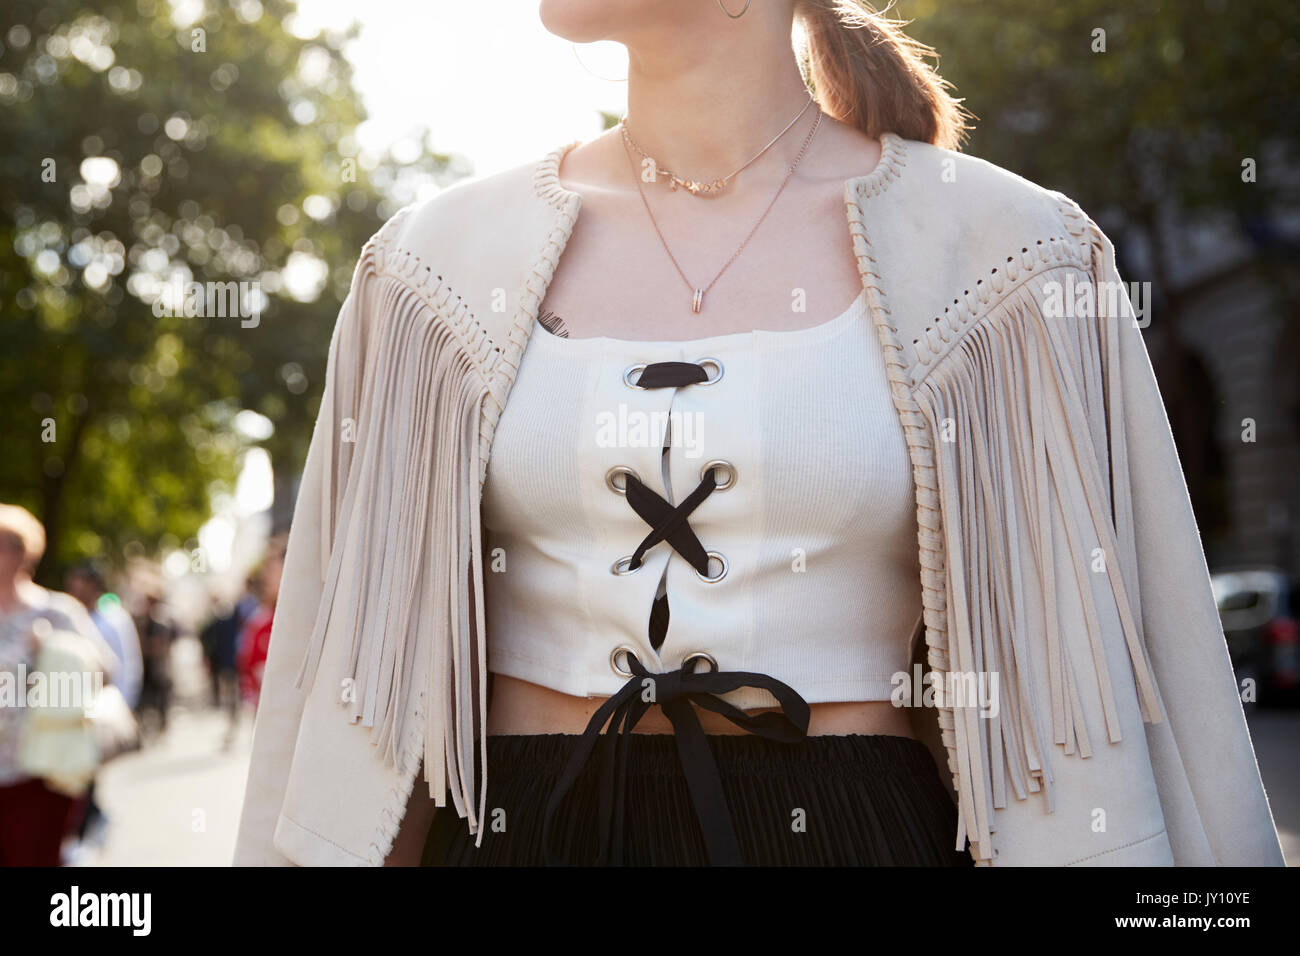 Woman in fringed jacket and laced up white top, close up Stock Photo